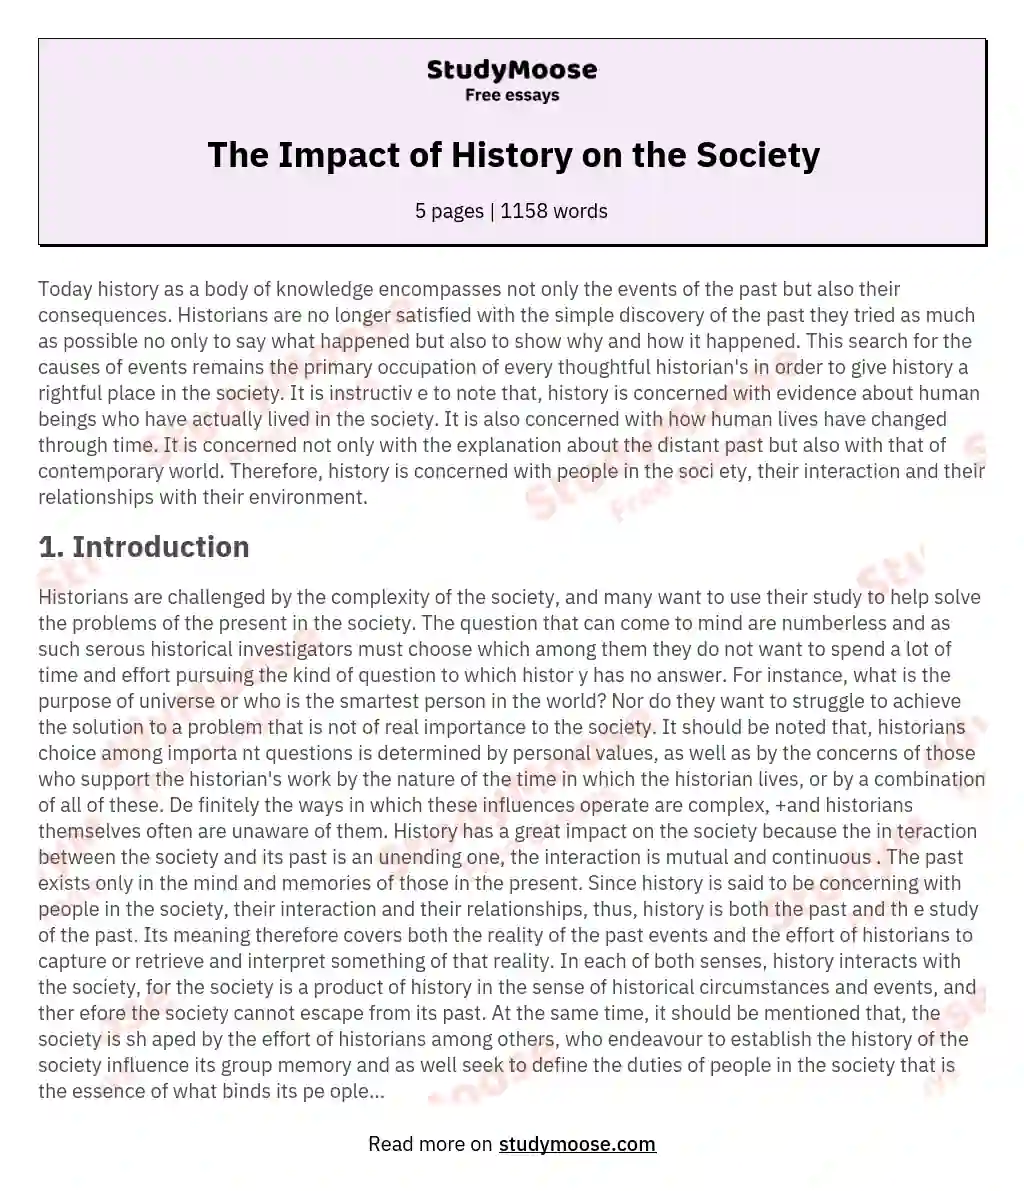 The Impact of History on the Society